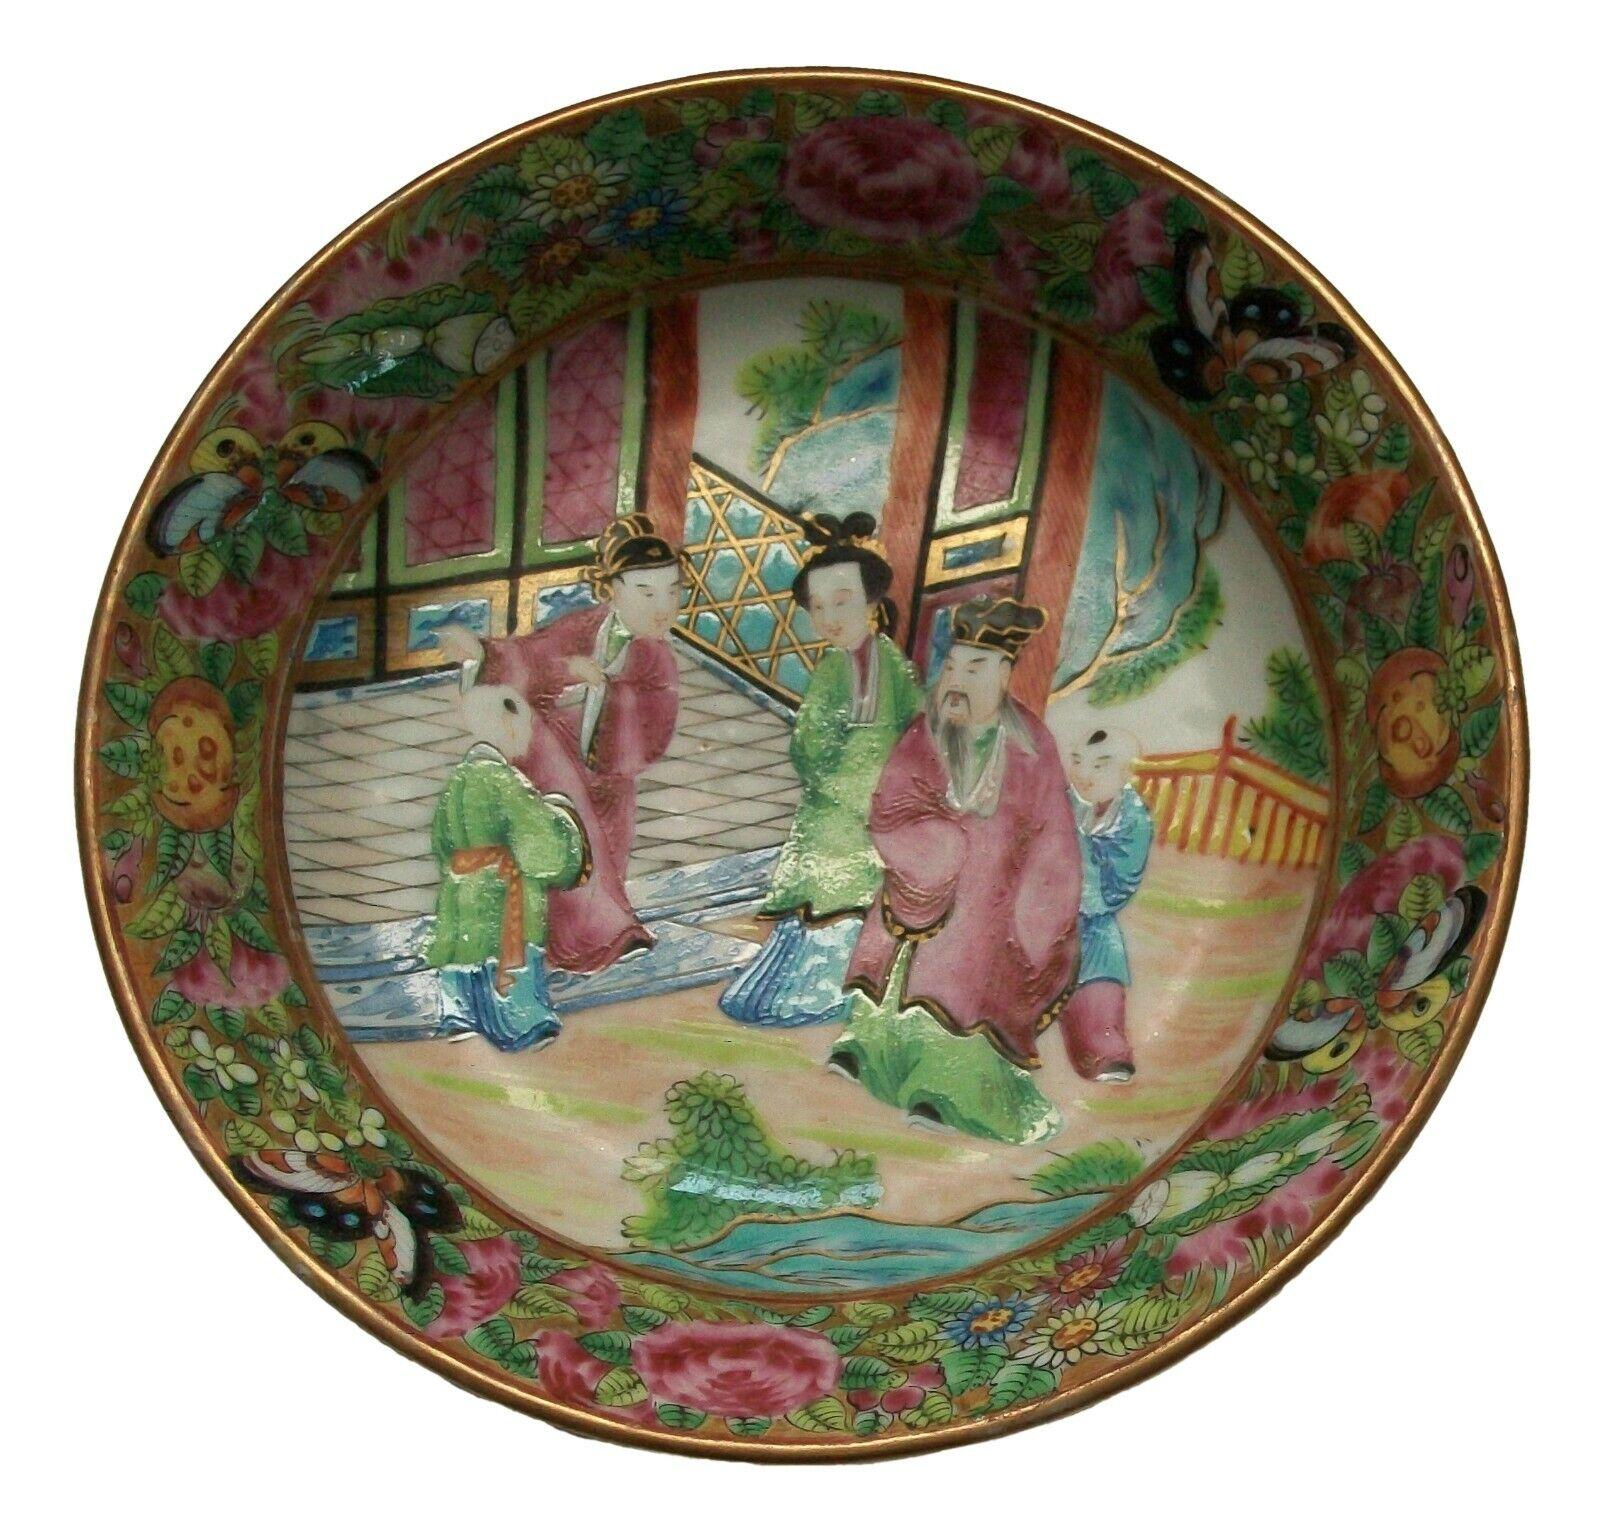 Antique 'famille rose' (also referred to as 'rose medallion') porcelain plate - hand painted with a courtyard scene to the center - floral and foliate border with butterflies on a gilt ground - gilded highlights among the colorful enamels - unsigned